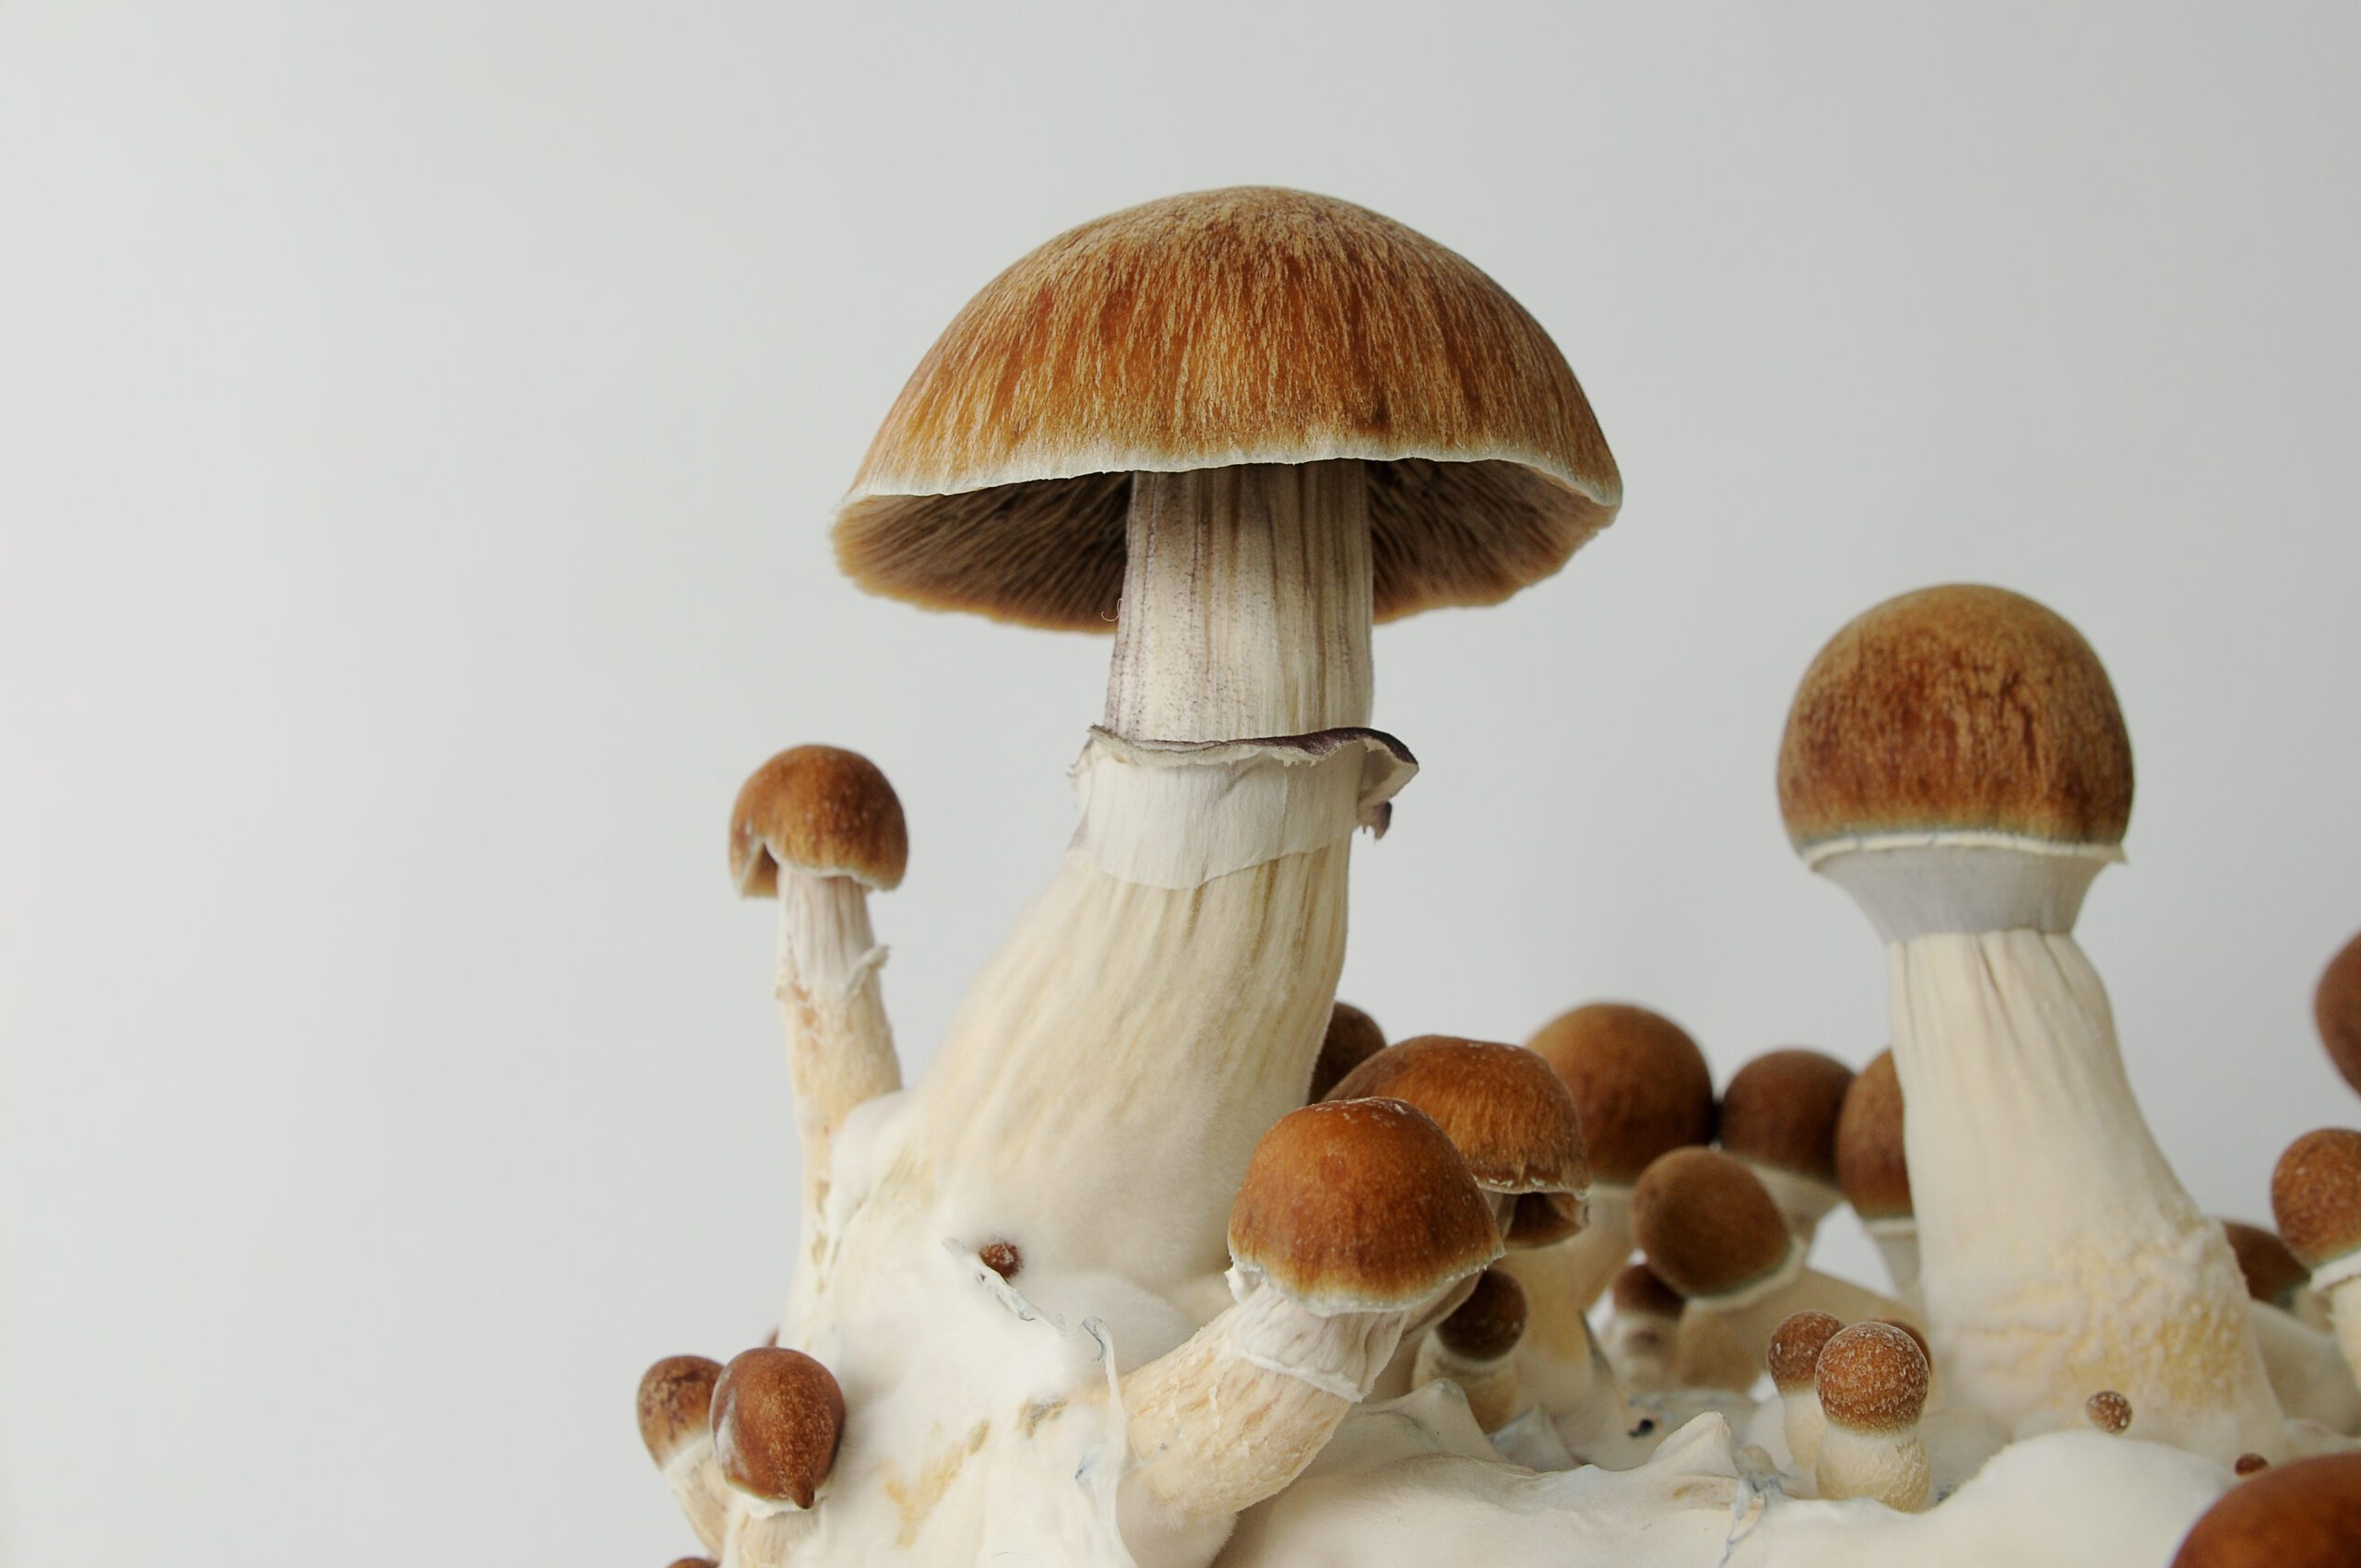 Comparative Analysis of Psilocybin and DMT